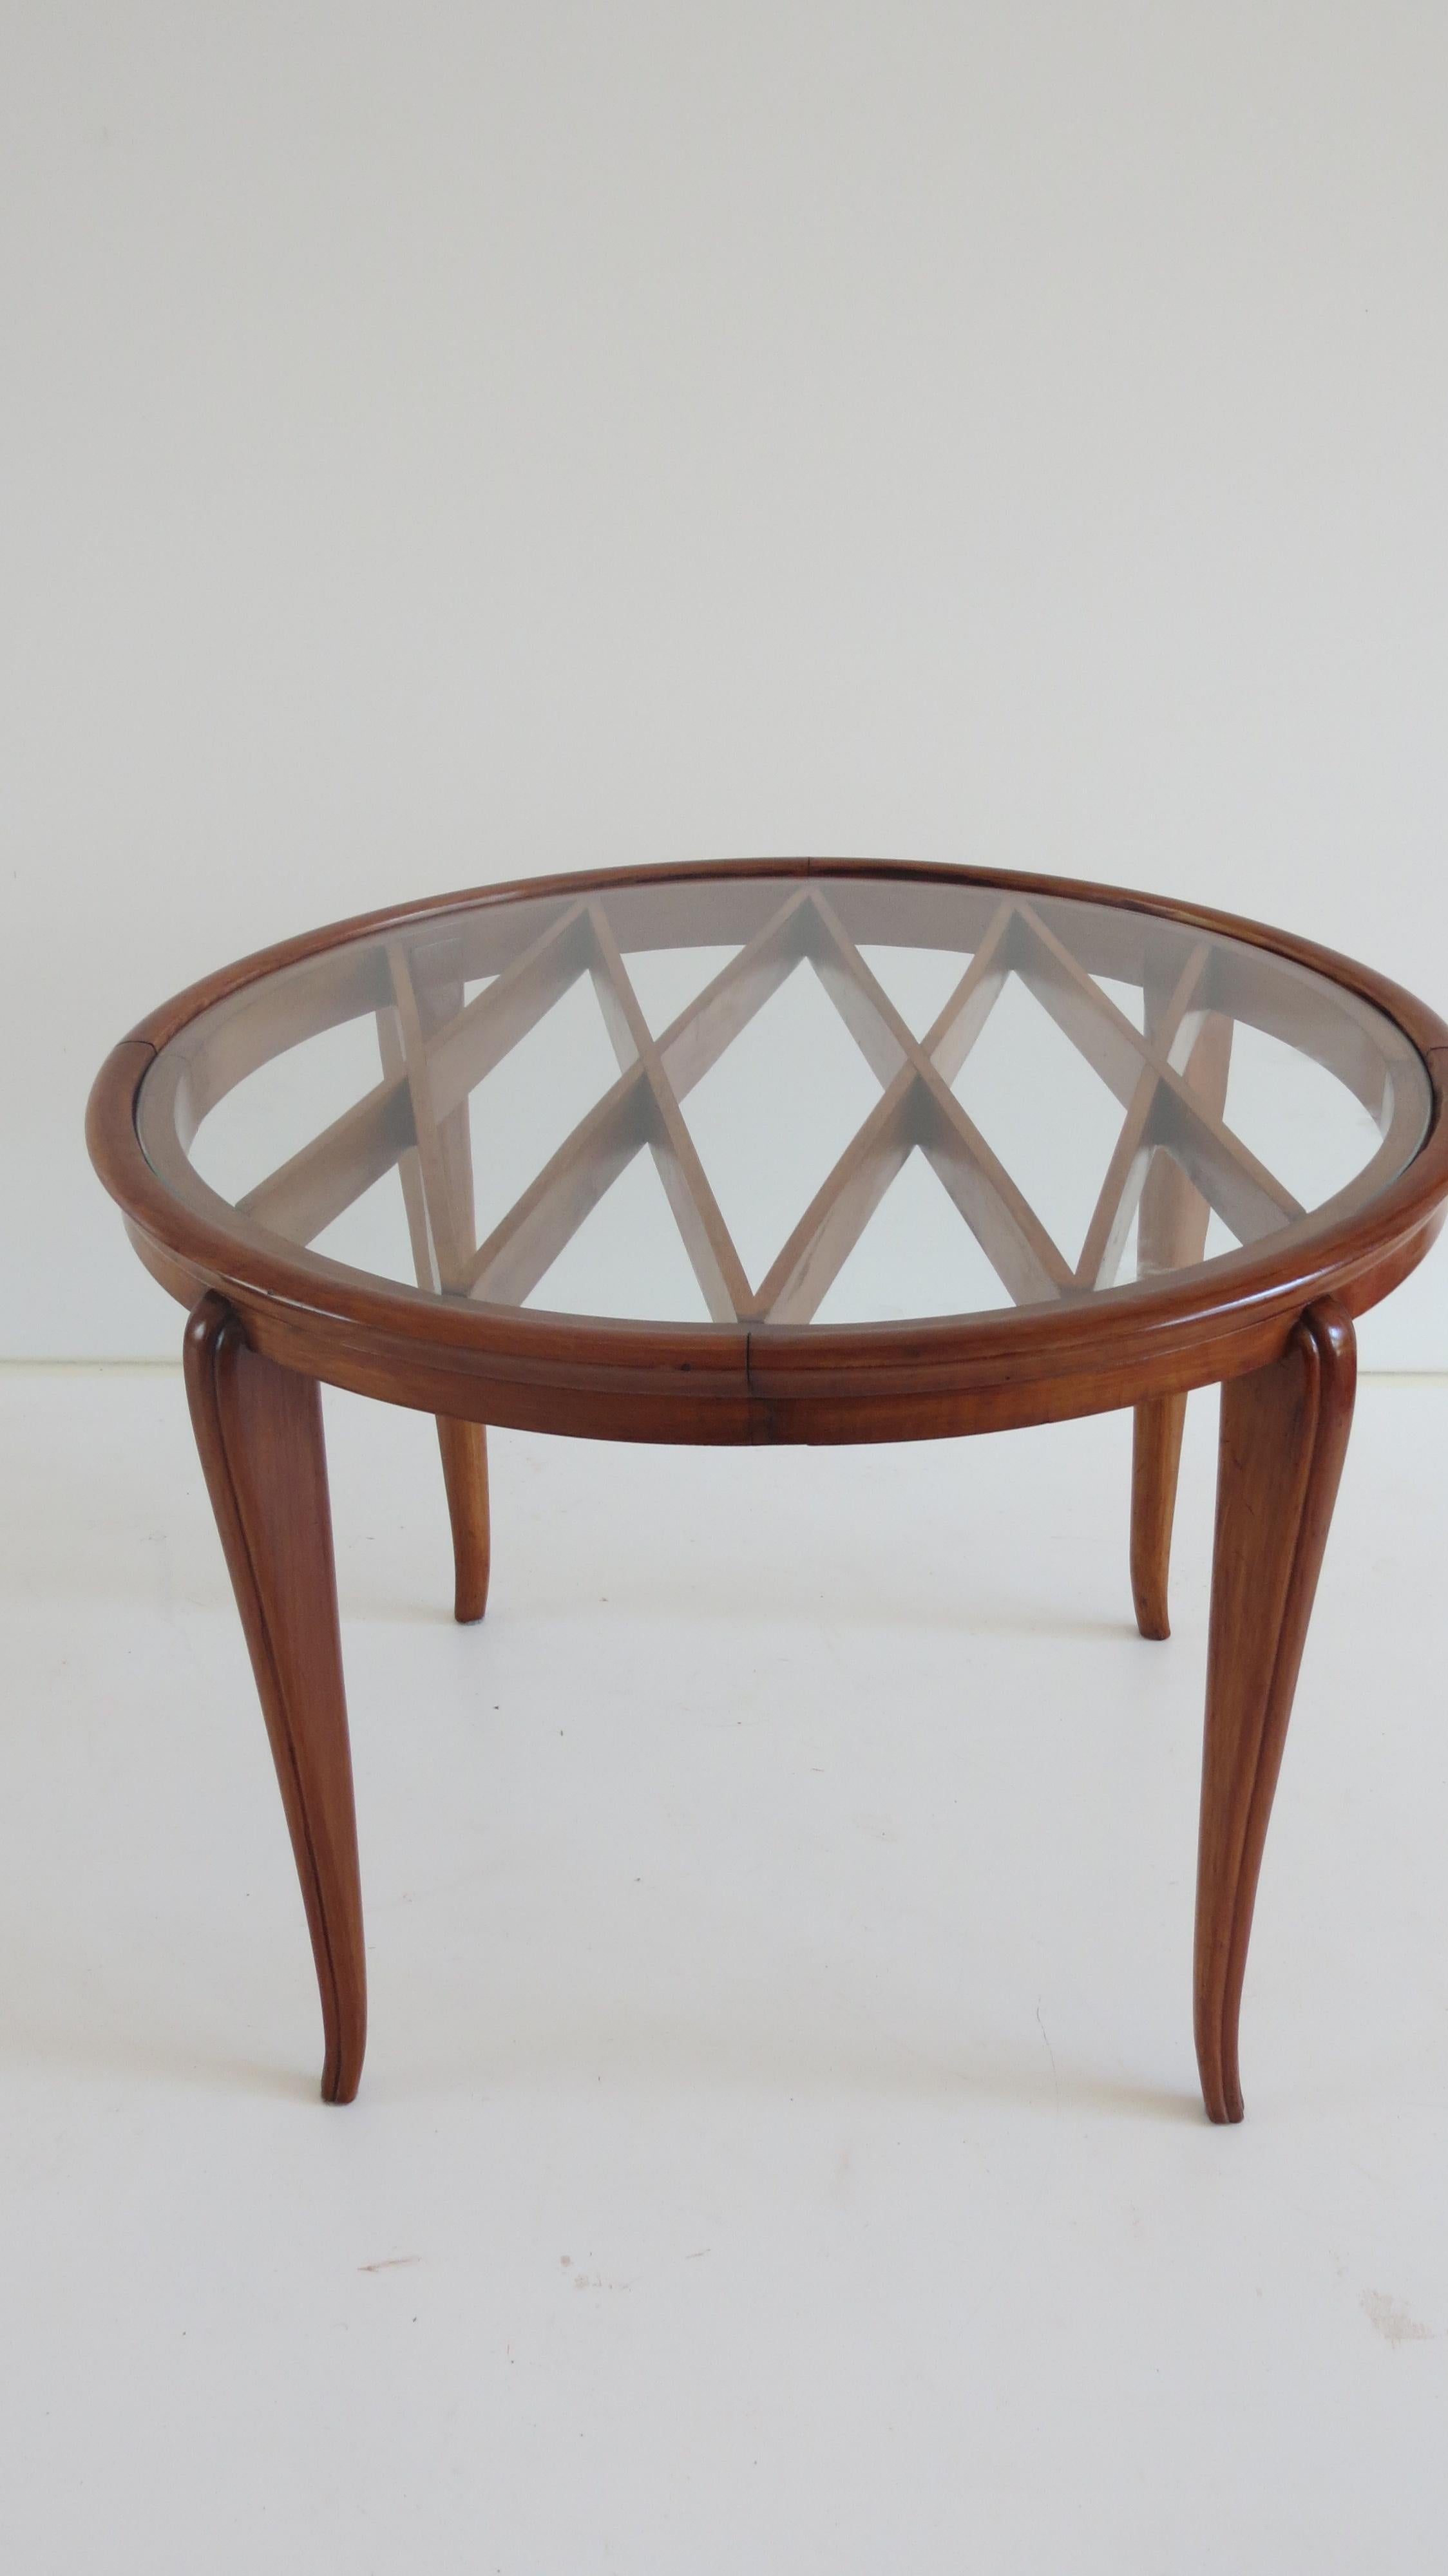 Elegant coffee table in the style of Gio Ponti, circa 1940
walnut and glass
very good condition
grid pattern top in walnut
Measures: diameter 68.5, height 48.5.
  